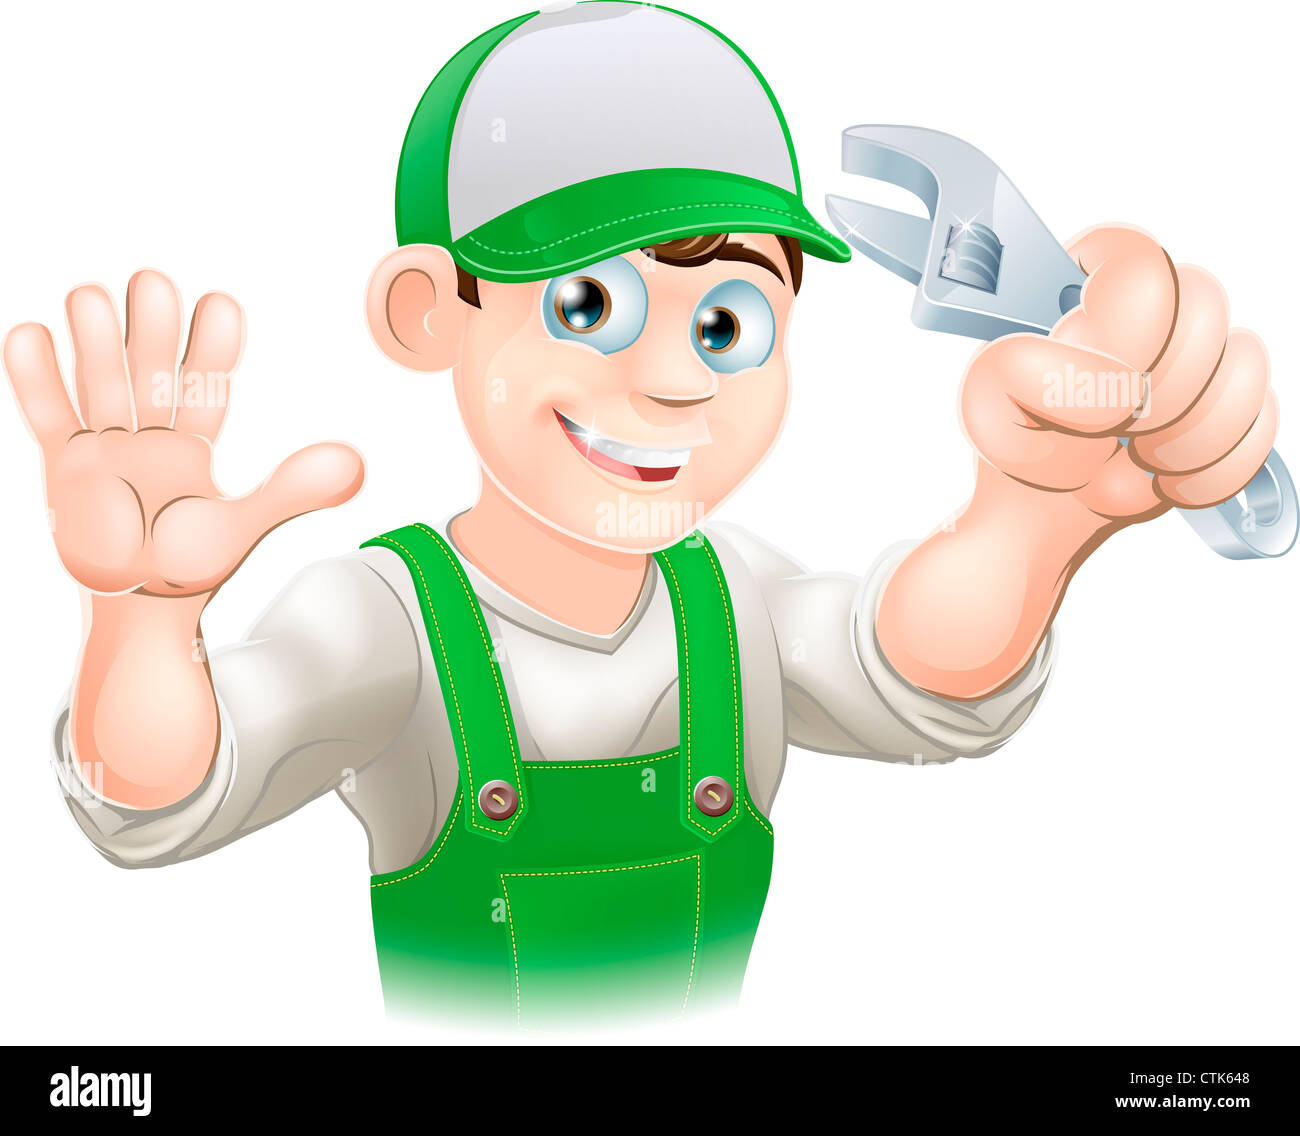 Graphic of smiling plumber or mechanic in overalls holding spanner and waving Stock Photo